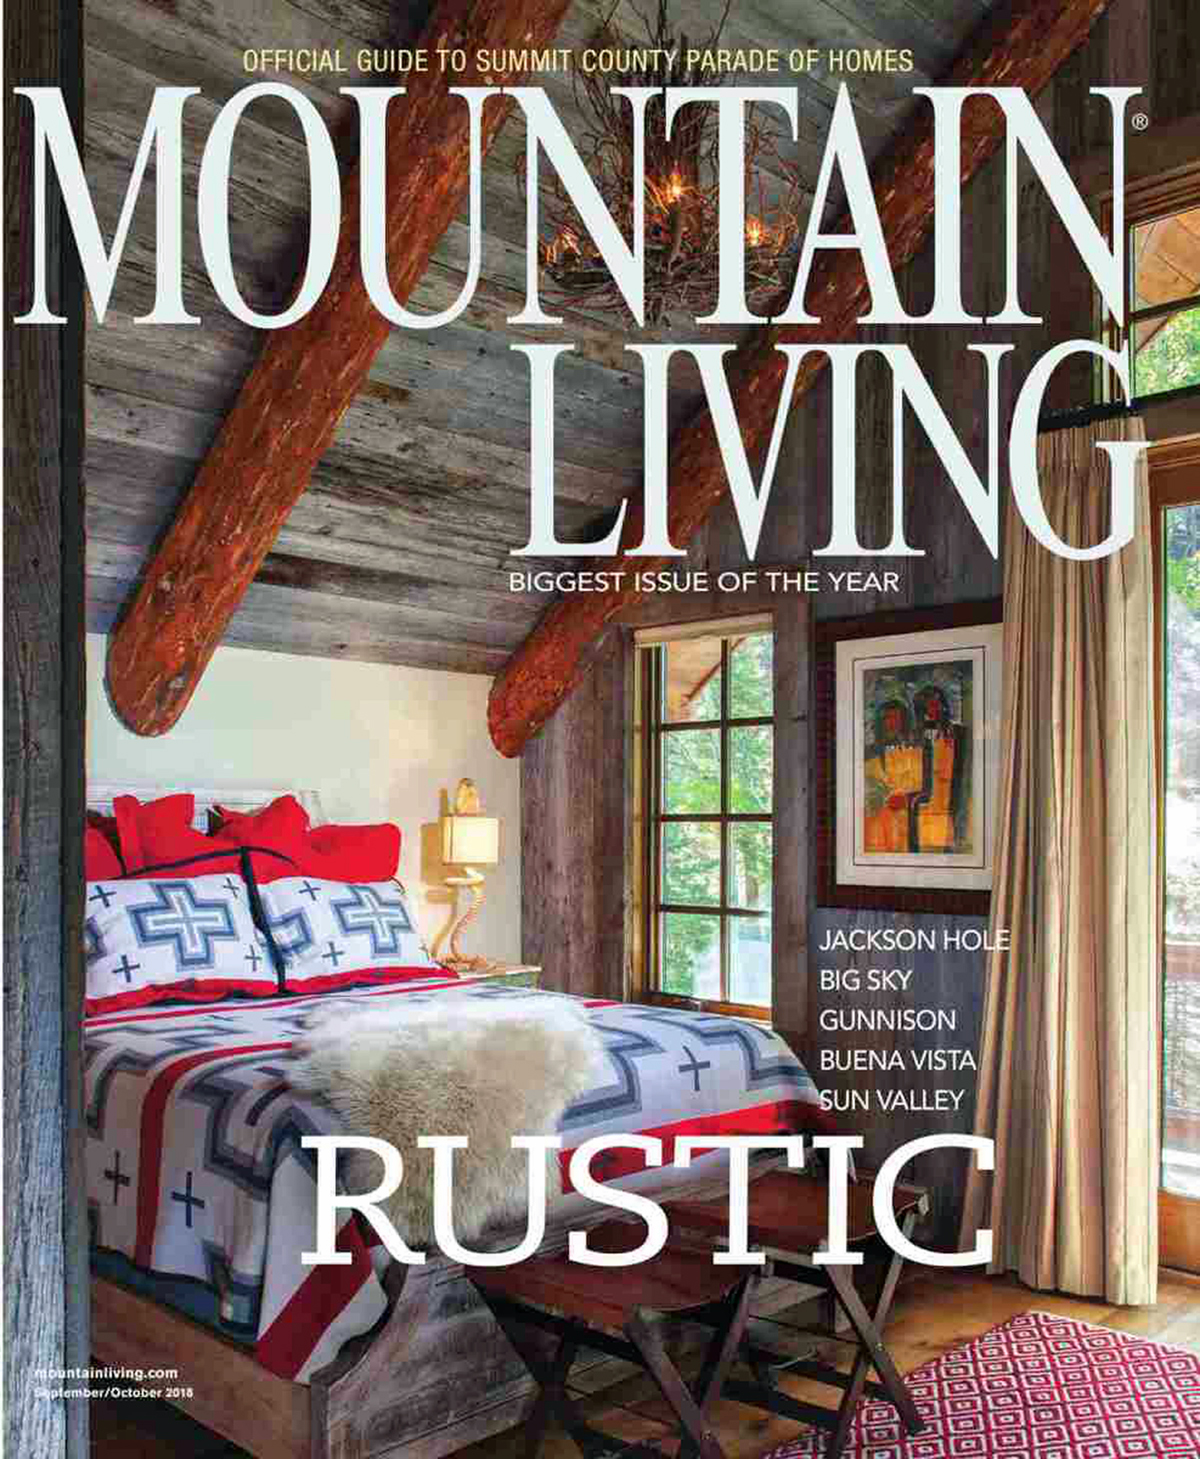 The September/October 2018 “rustic” issue of Mountain Living magazine highlights two feature stories on Rocky Mountain custom homes by JLF Architects.